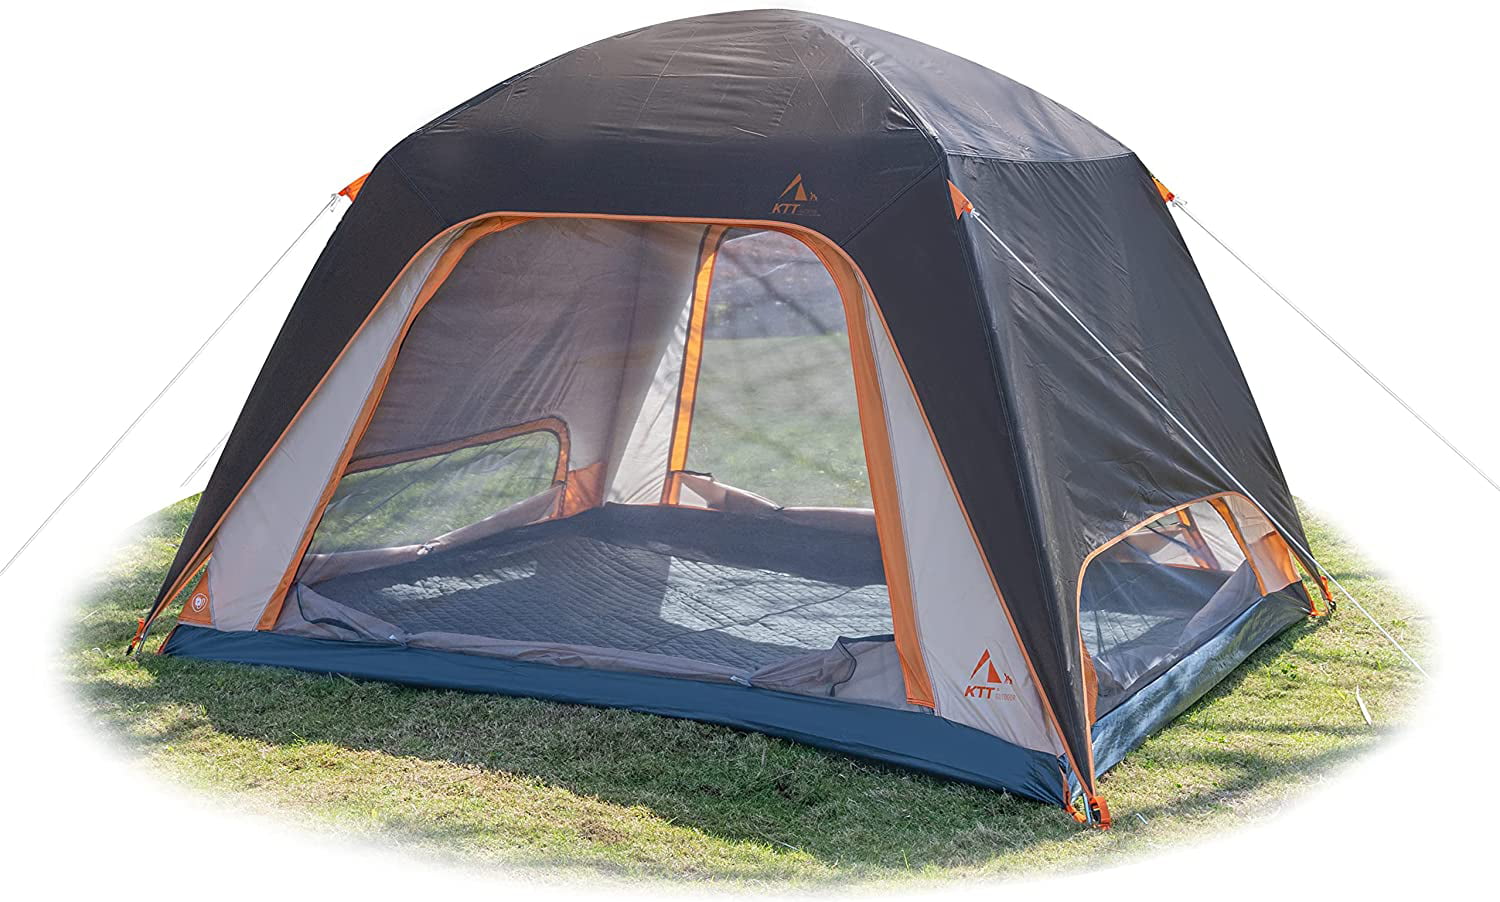  KTT Large Tent 6 Person,Family Cabin Tents,Straight